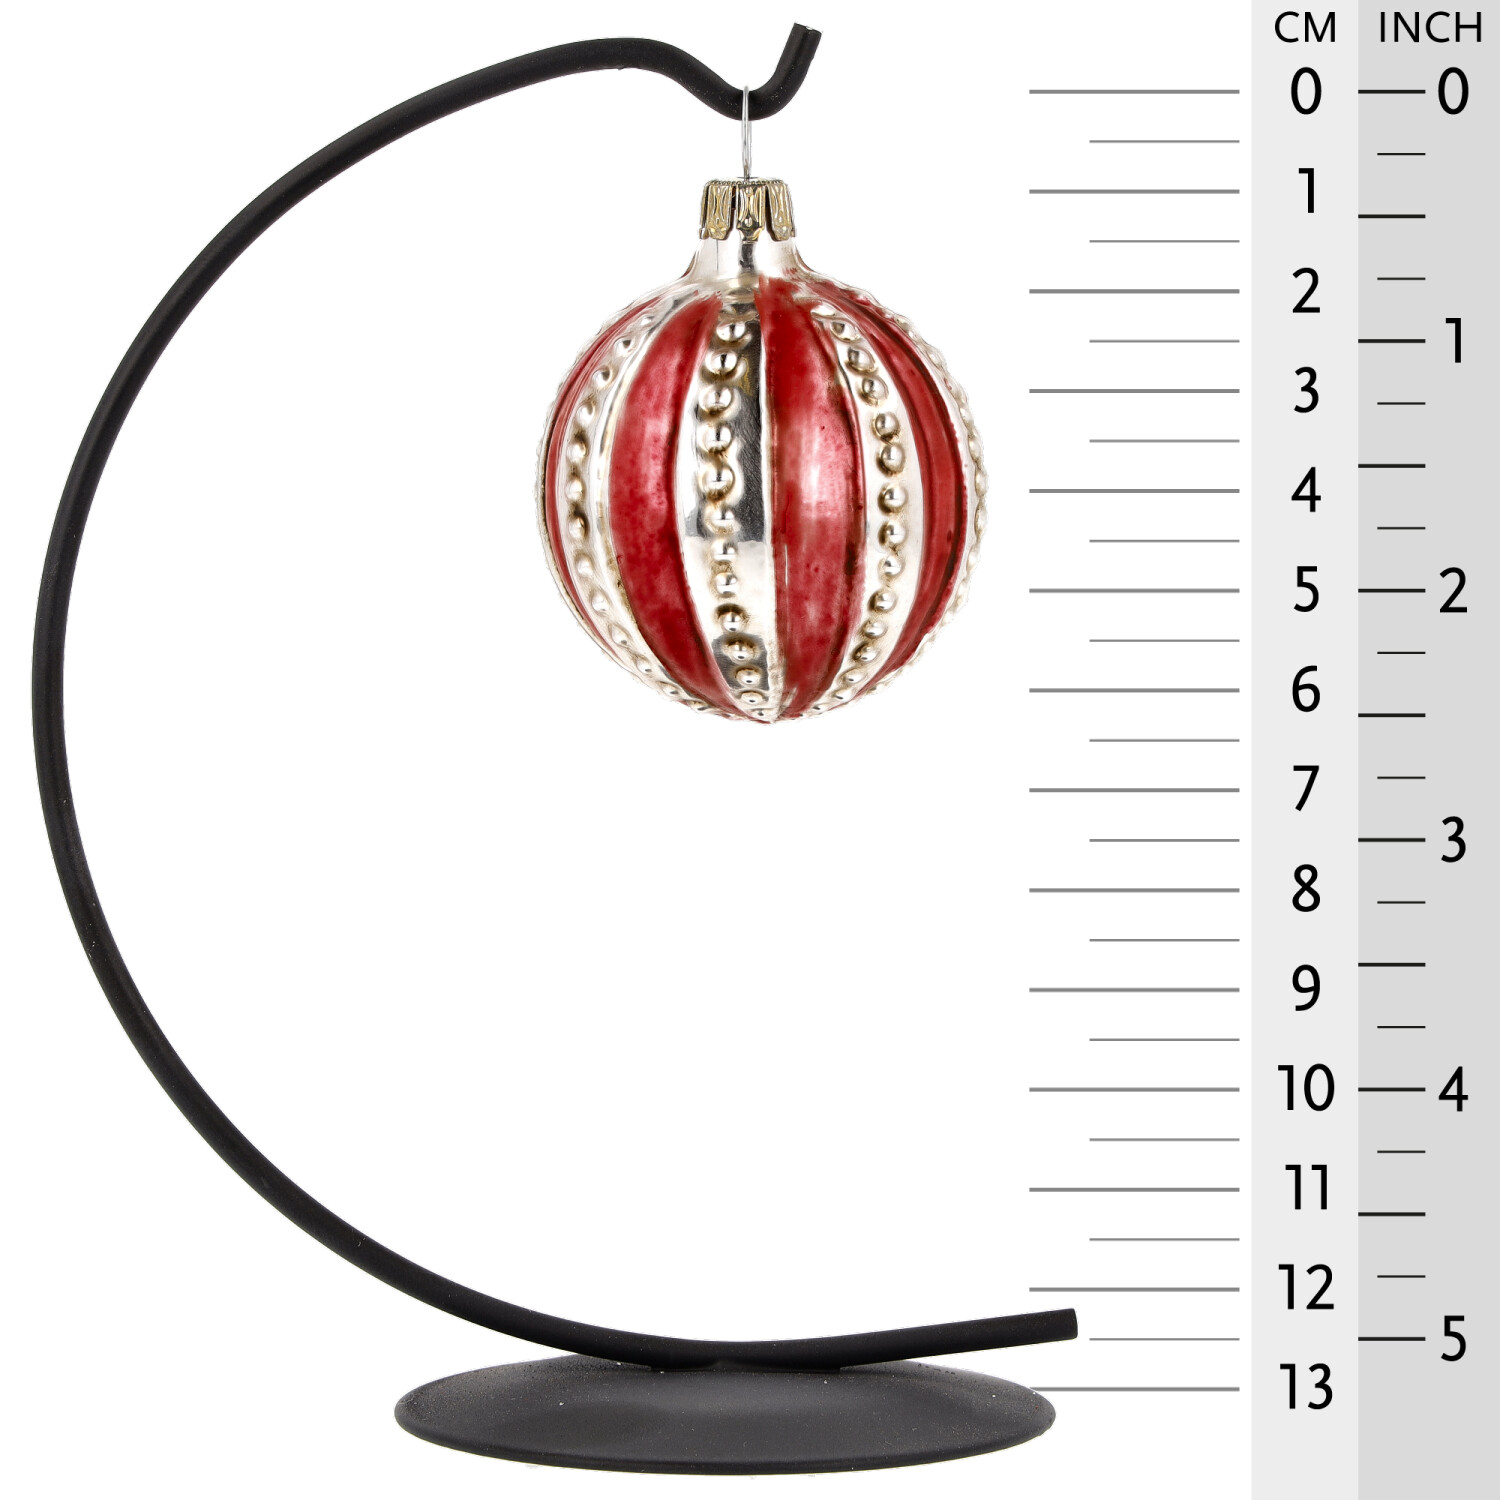 Retro Vintage style Christmas Glass Ornament - Ball with knobs and red stripes